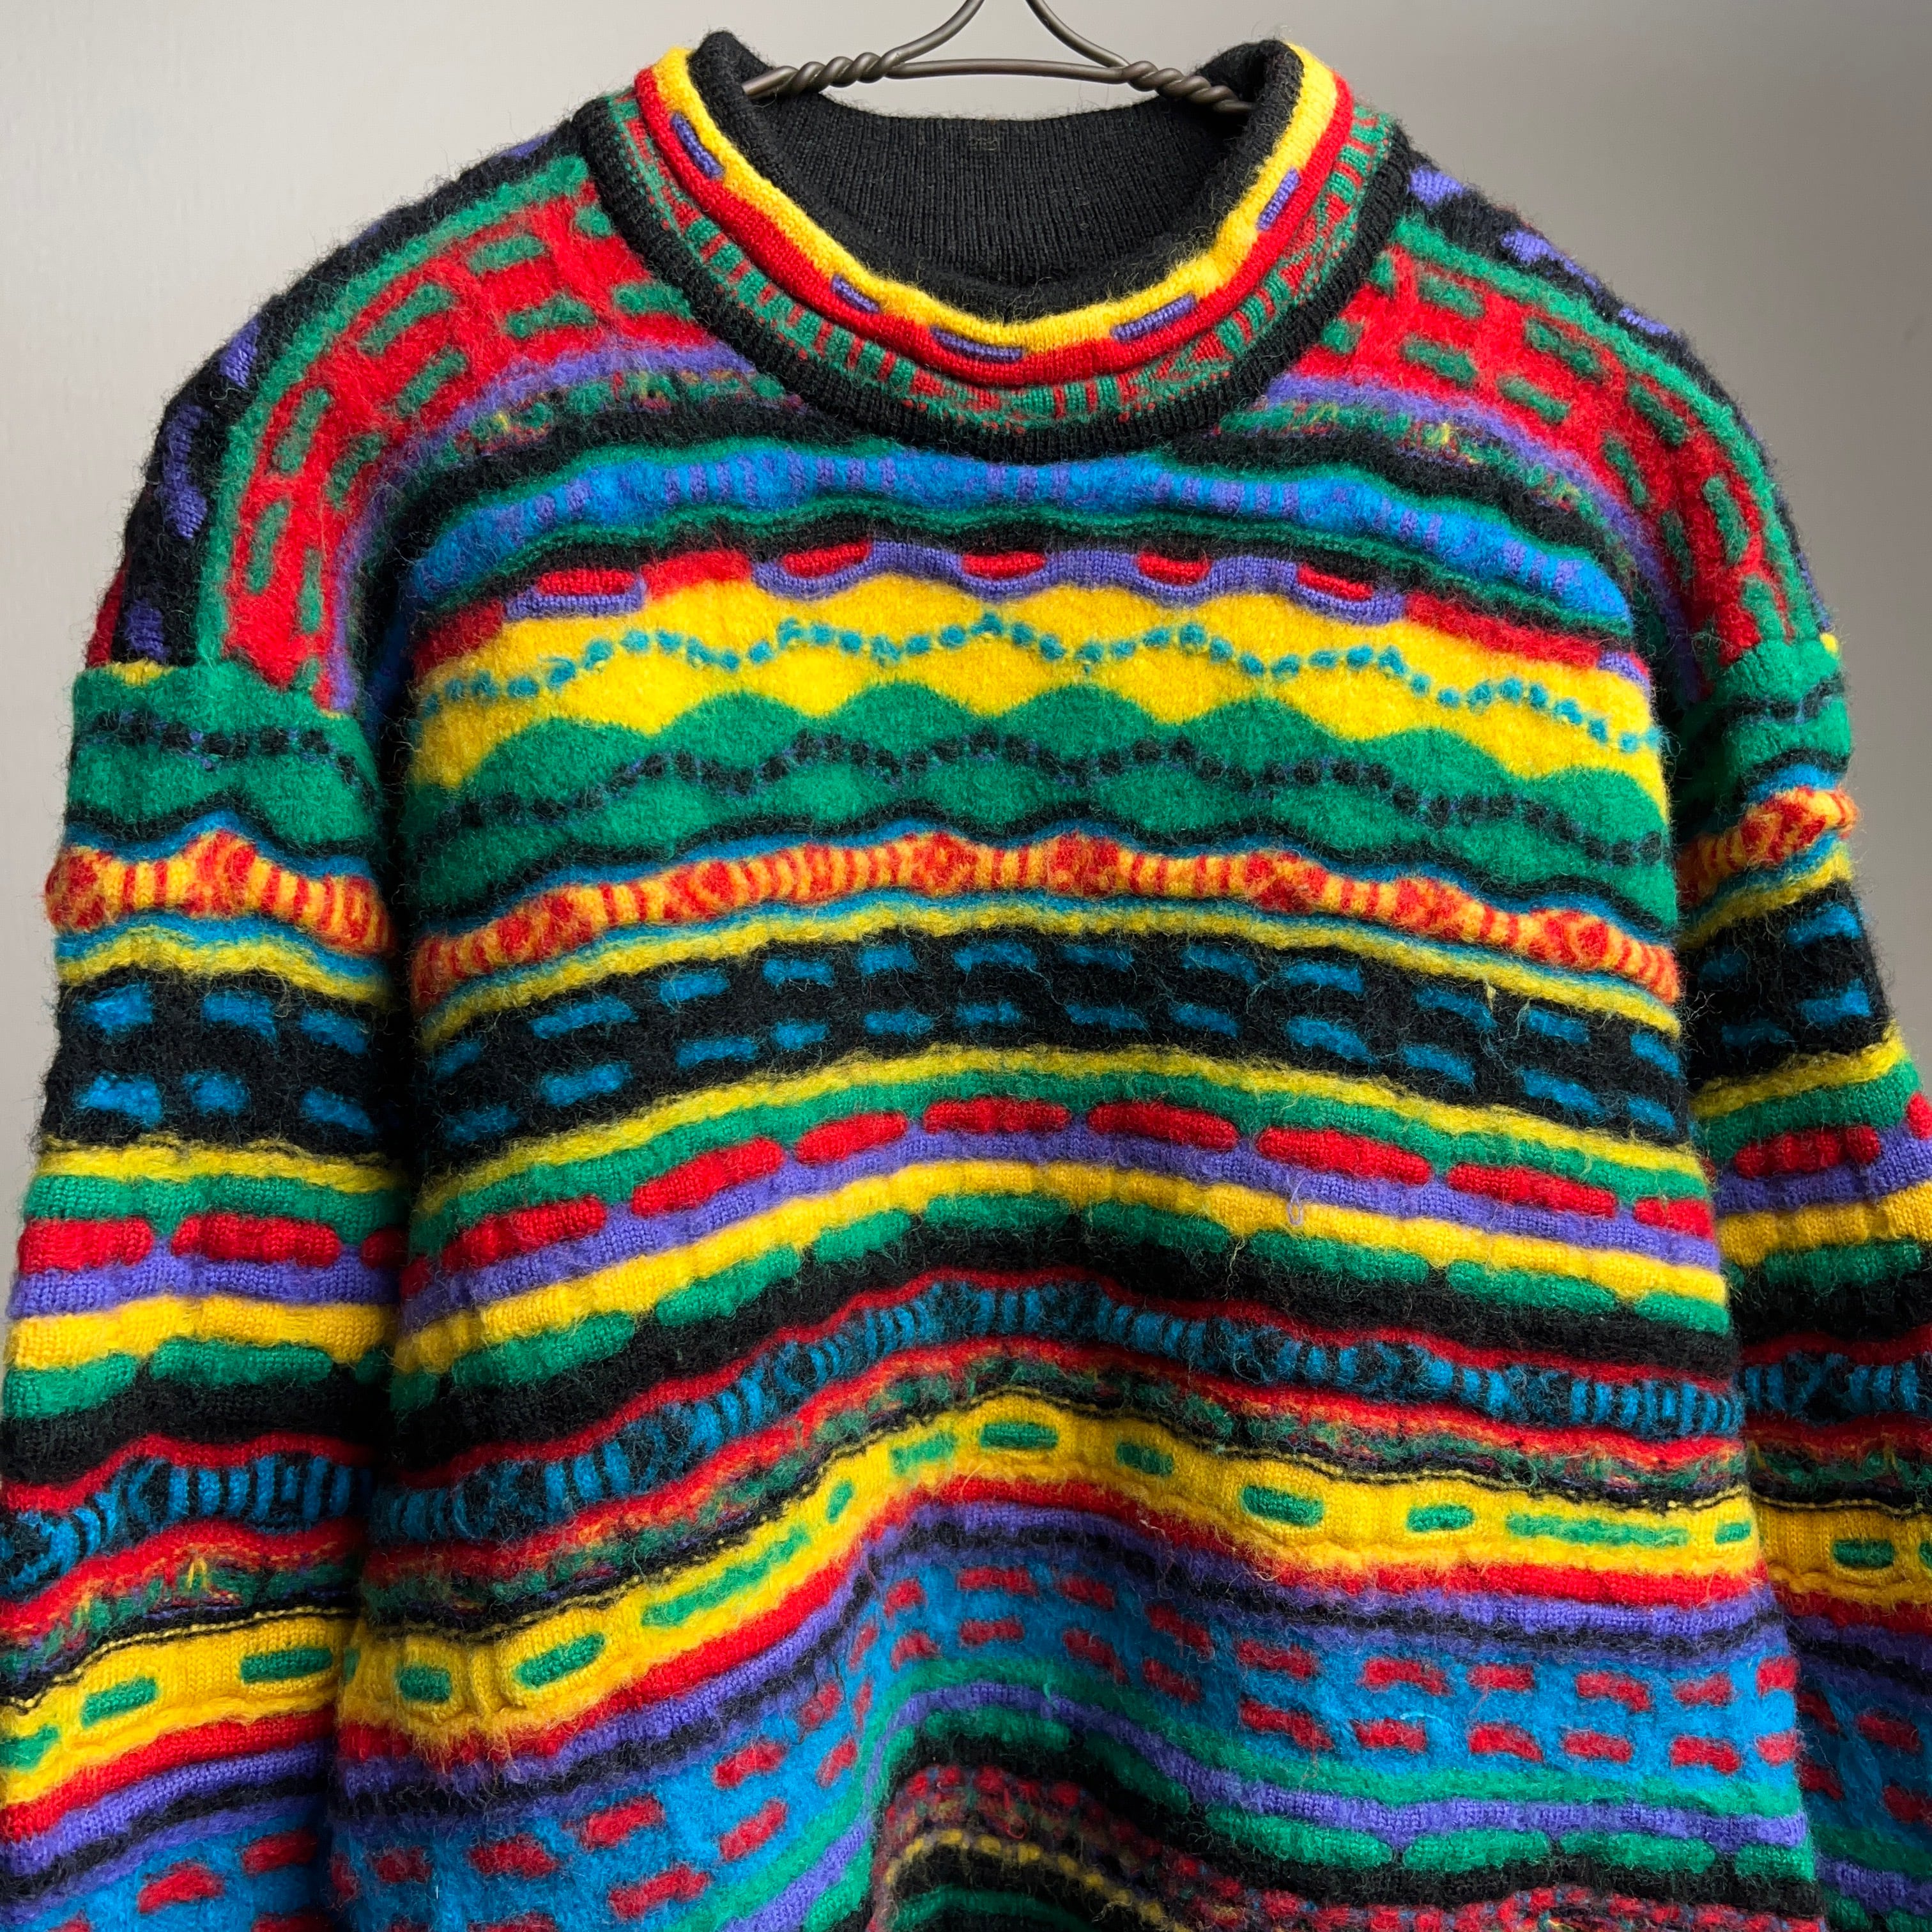 90's~ “COOGI” WOOL 3D KNIT SWEATER SIZE L クージー ウール 3Dニット 総柄 立体編み  90年代【0908A23】【送料無料】